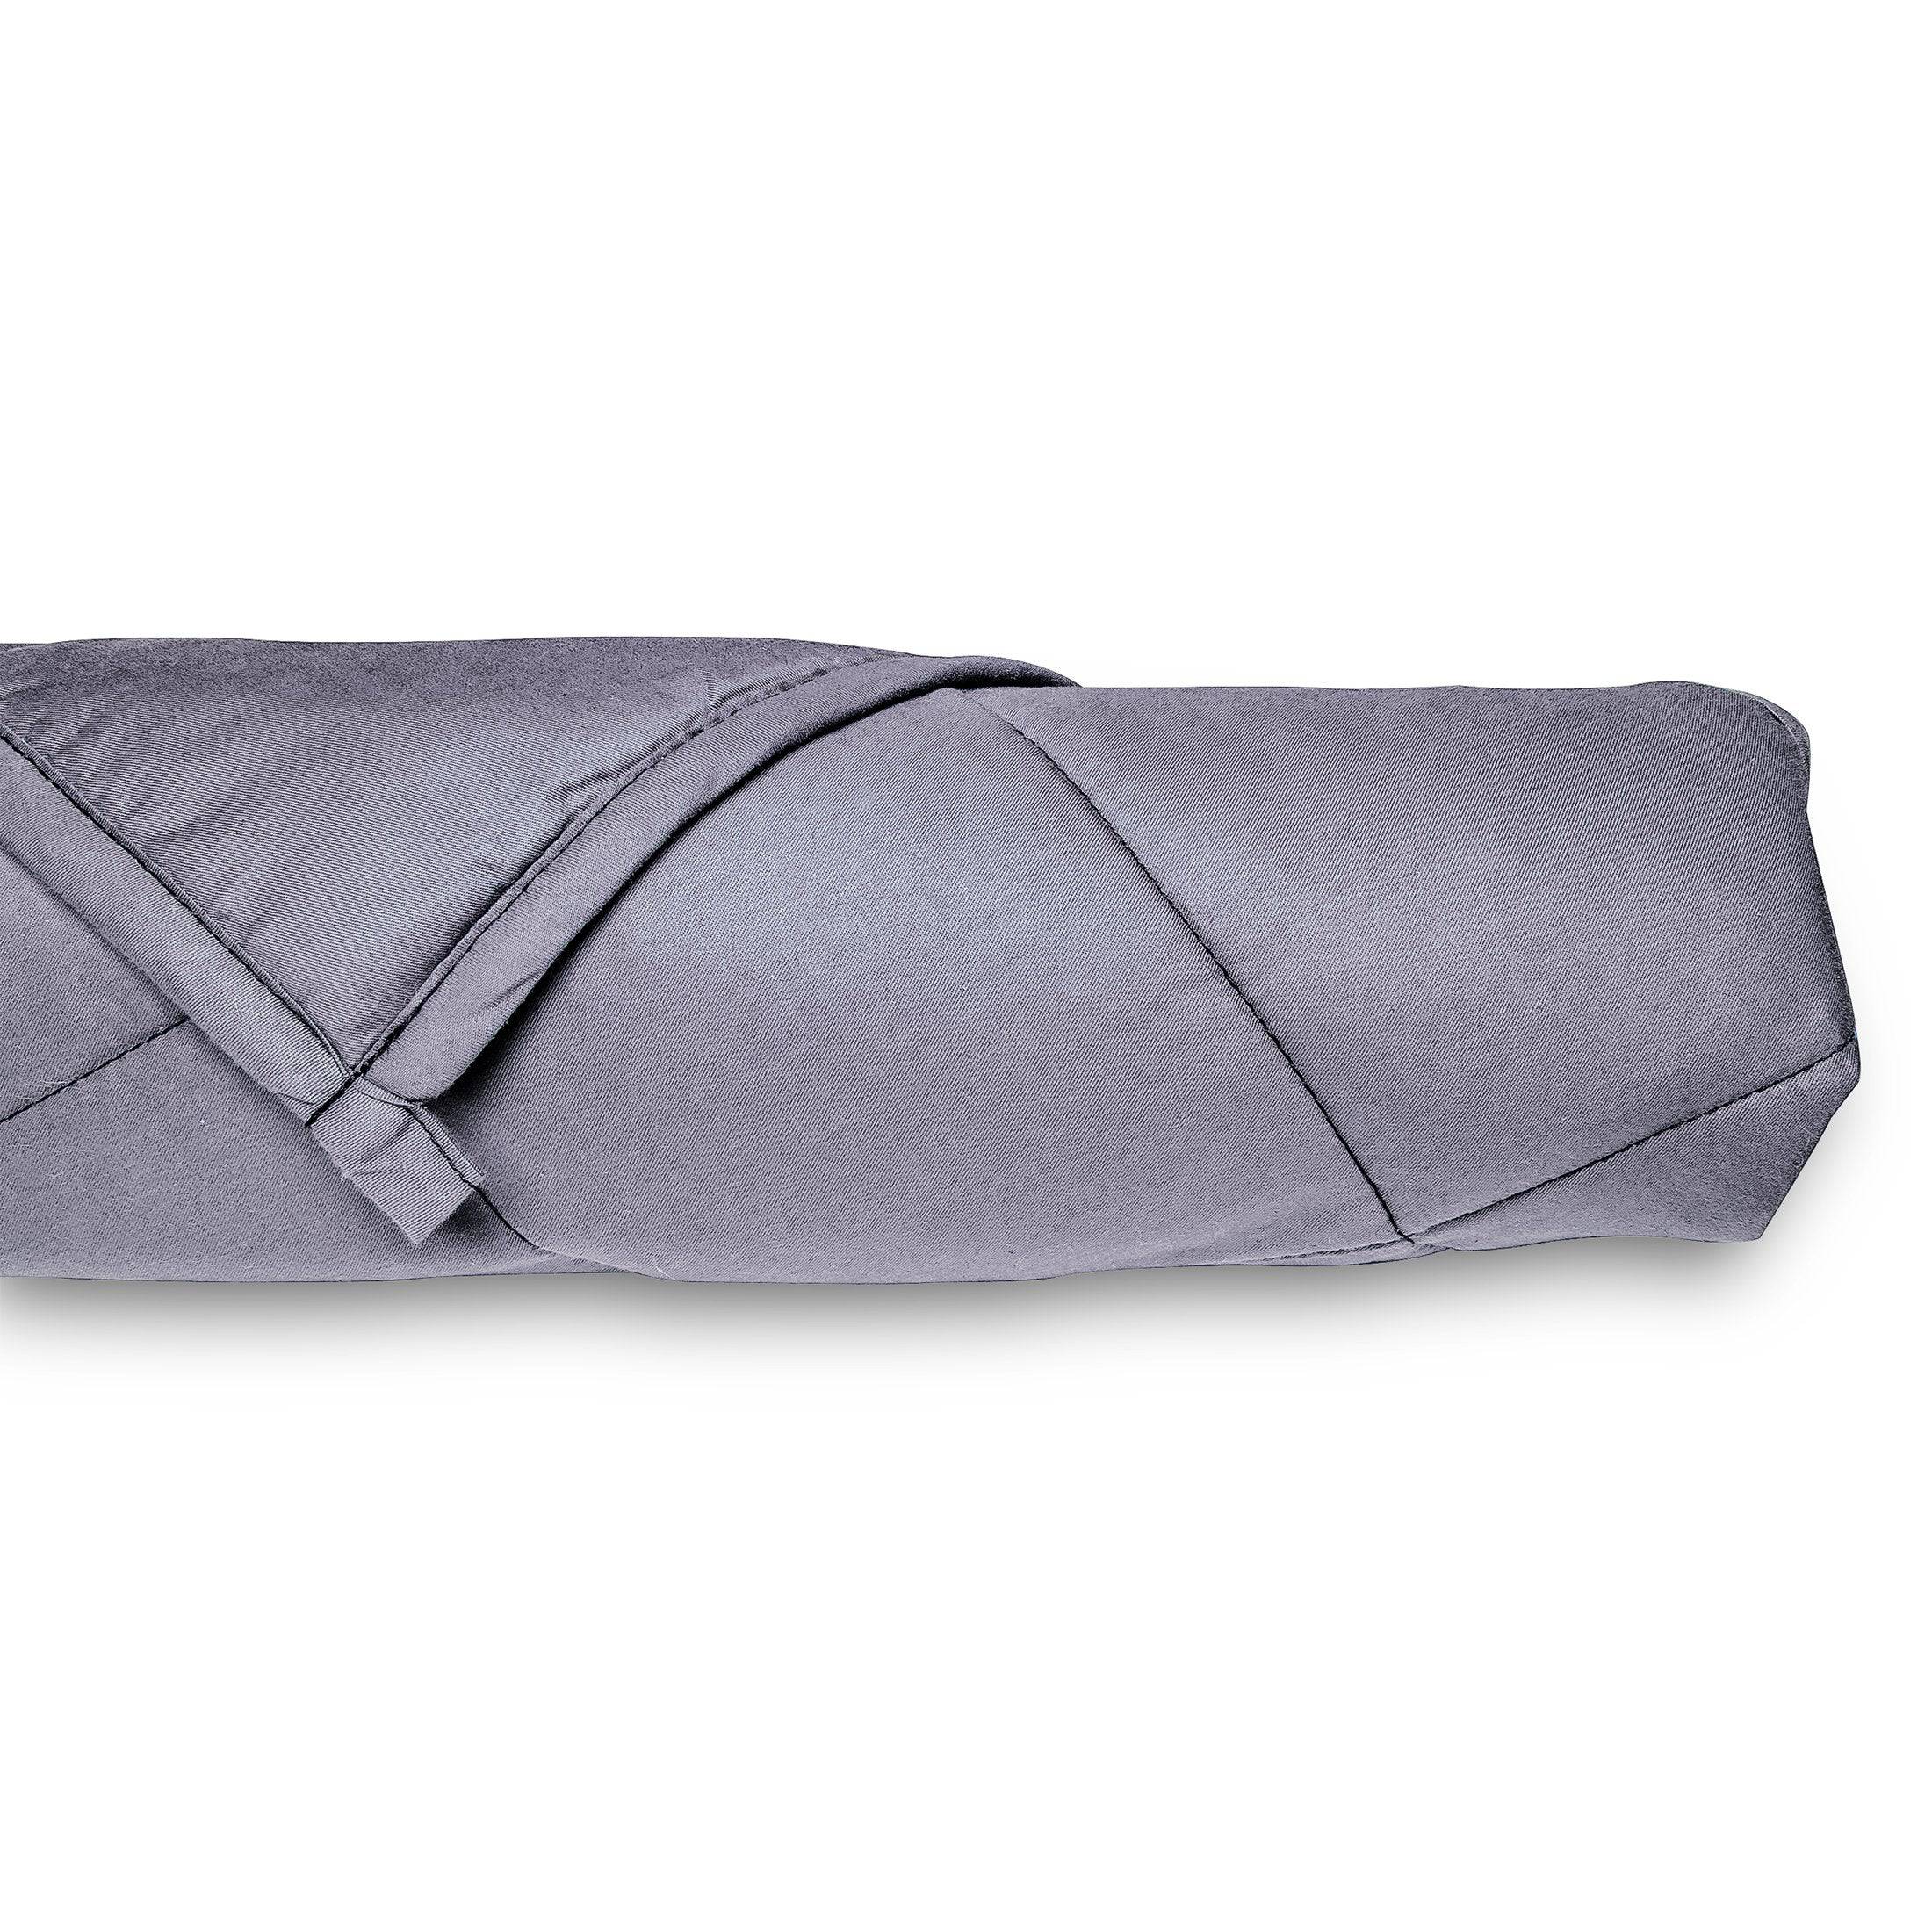 Bed Buddy Weighted Blanket - Adult and Kid Sized - Carex Health Brands